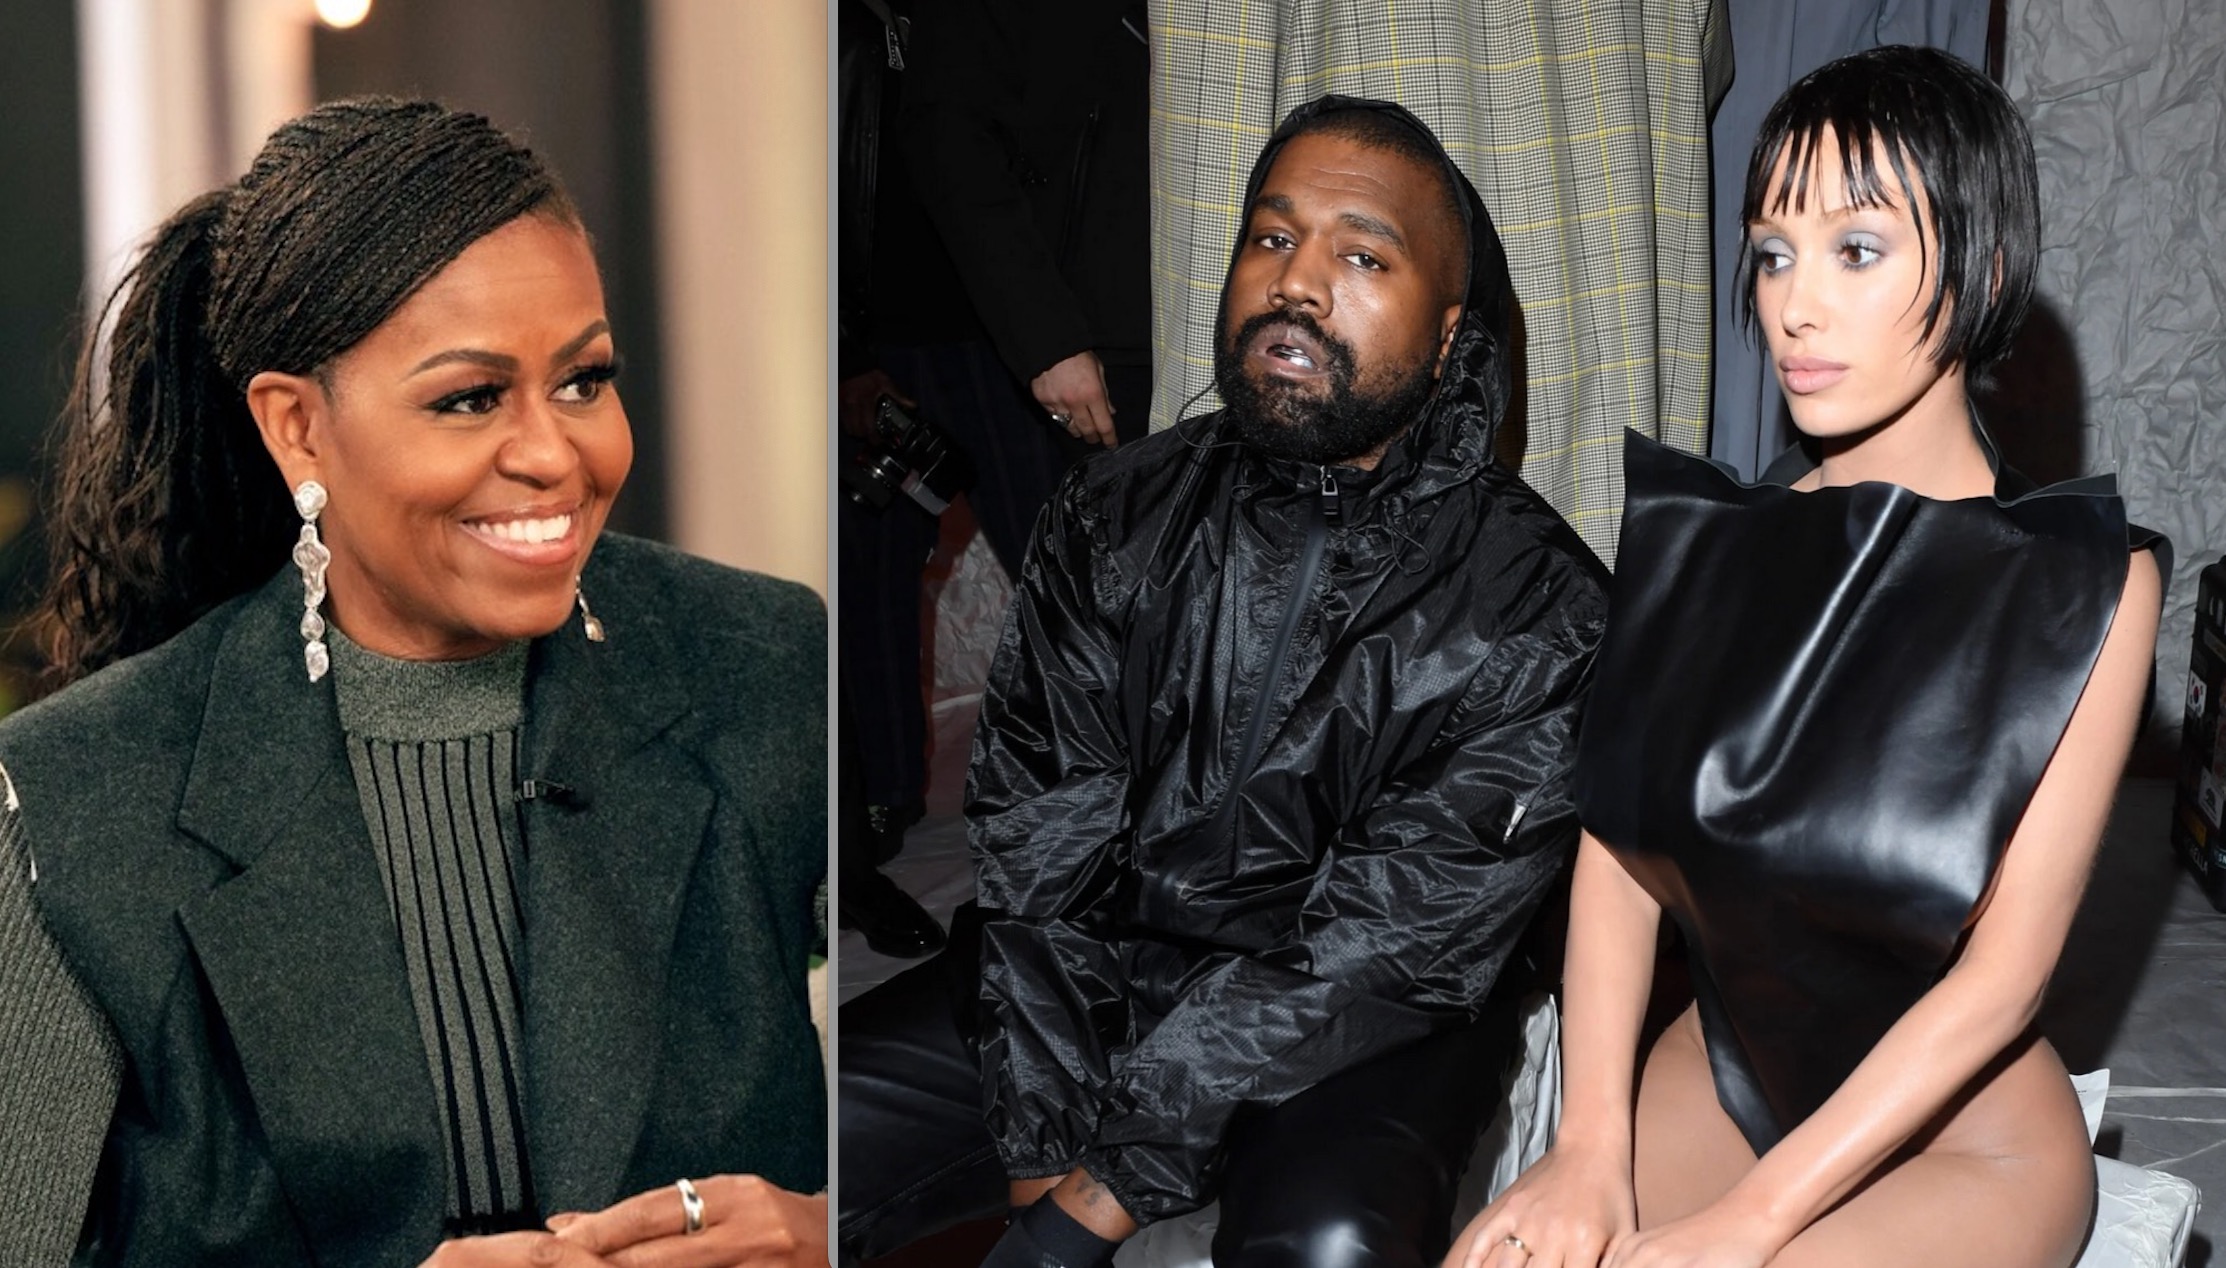 Ye Fantasizes about Threesome with Michelle Obama and Bianca Censori